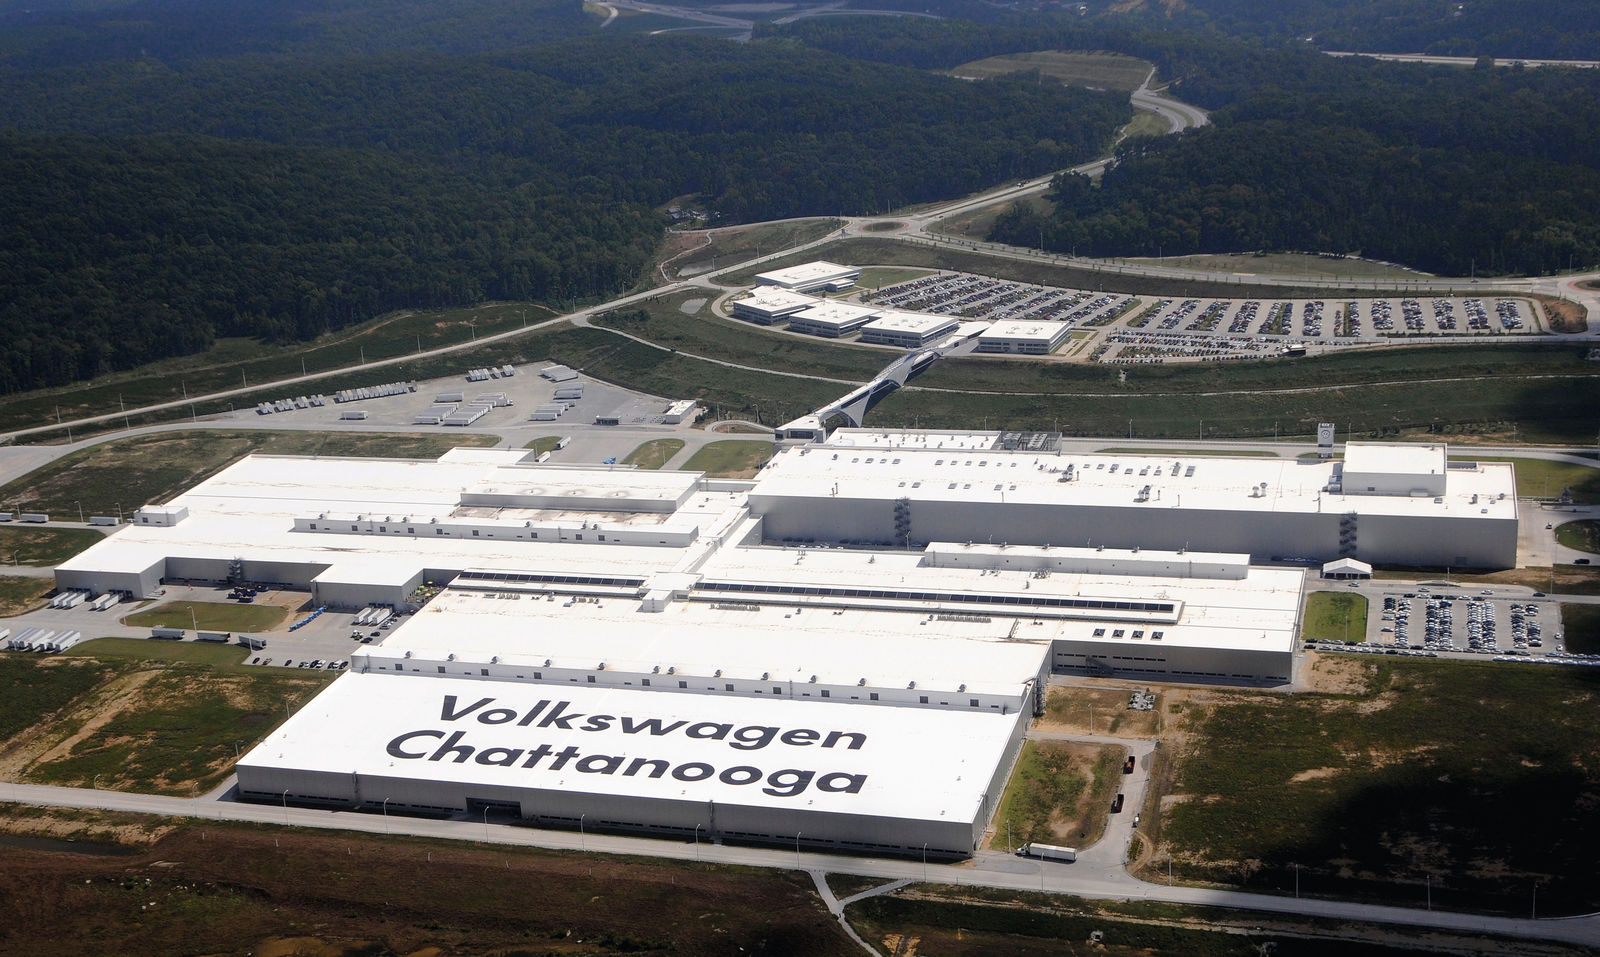 Introduce 47+ images volkswagen plants in usa - In.thptnganamst.edu.vn